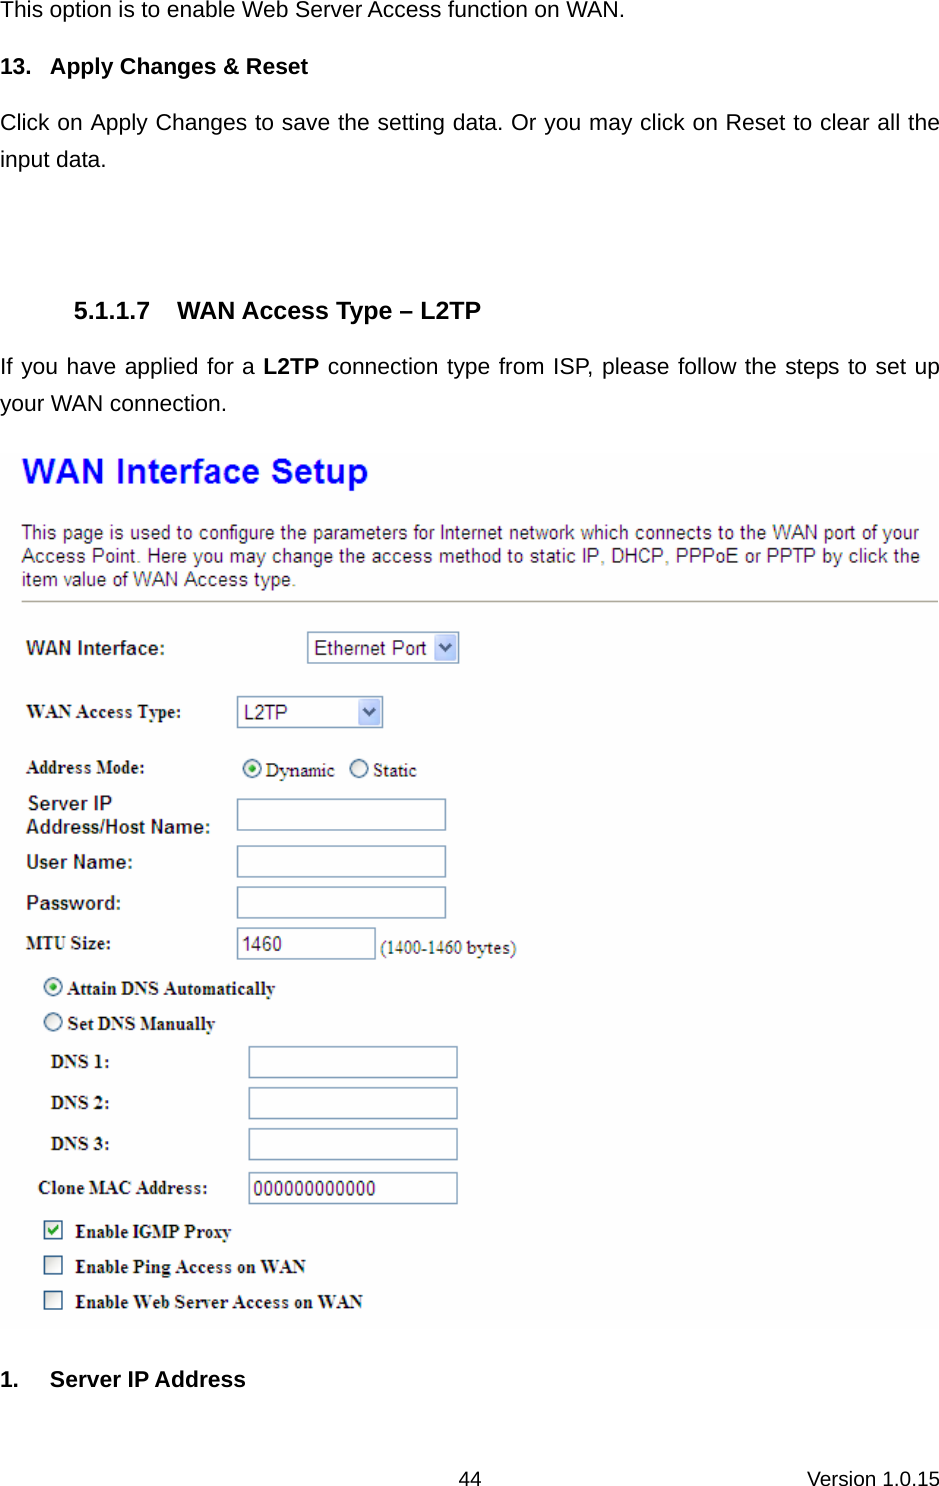 Version 1.0.15 44This option is to enable Web Server Access function on WAN. 13.  Apply Changes &amp; Reset Click on Apply Changes to save the setting data. Or you may click on Reset to clear all the input data.  5.1.1.7  WAN Access Type – L2TP If you have applied for a L2TP connection type from ISP, please follow the steps to set up your WAN connection.  1. Server IP Address 